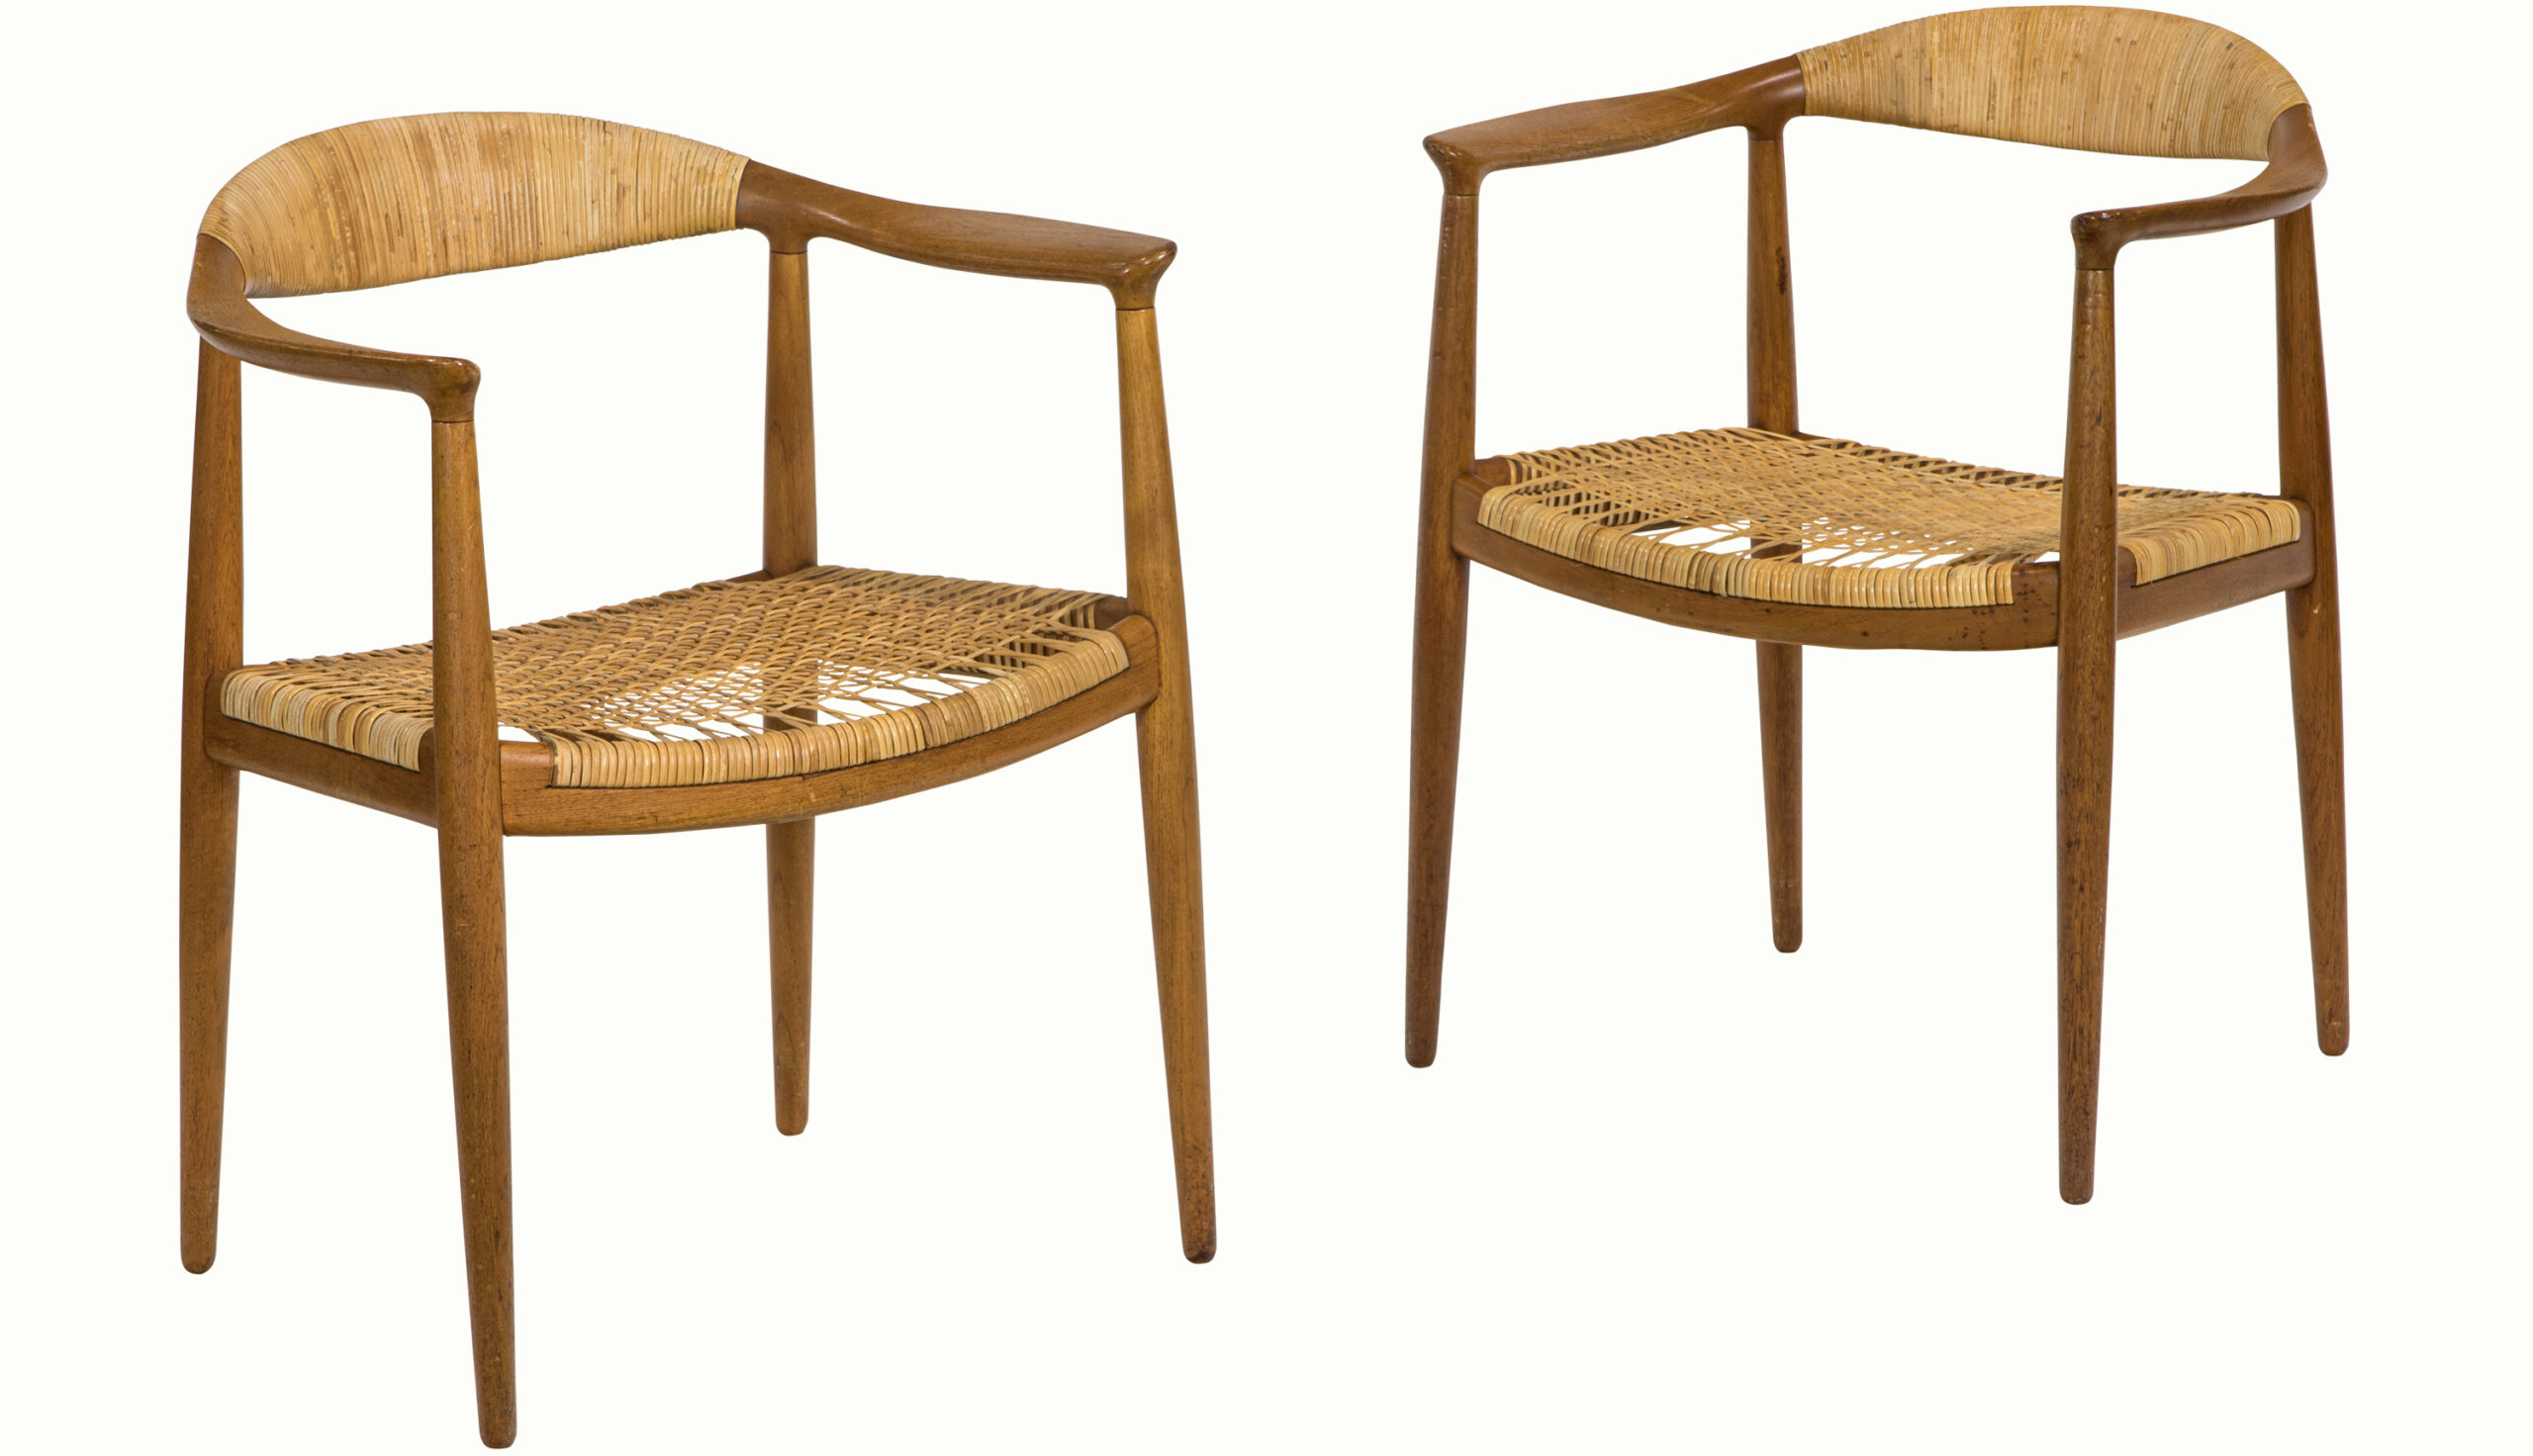 A pair of Hans Wegner chairs for Johannes Hansen, model: JH-501. Provenance: Originally from Skidmore, Owings, and Merrill in San Francisco where owner was employed for 40 years (by descent).